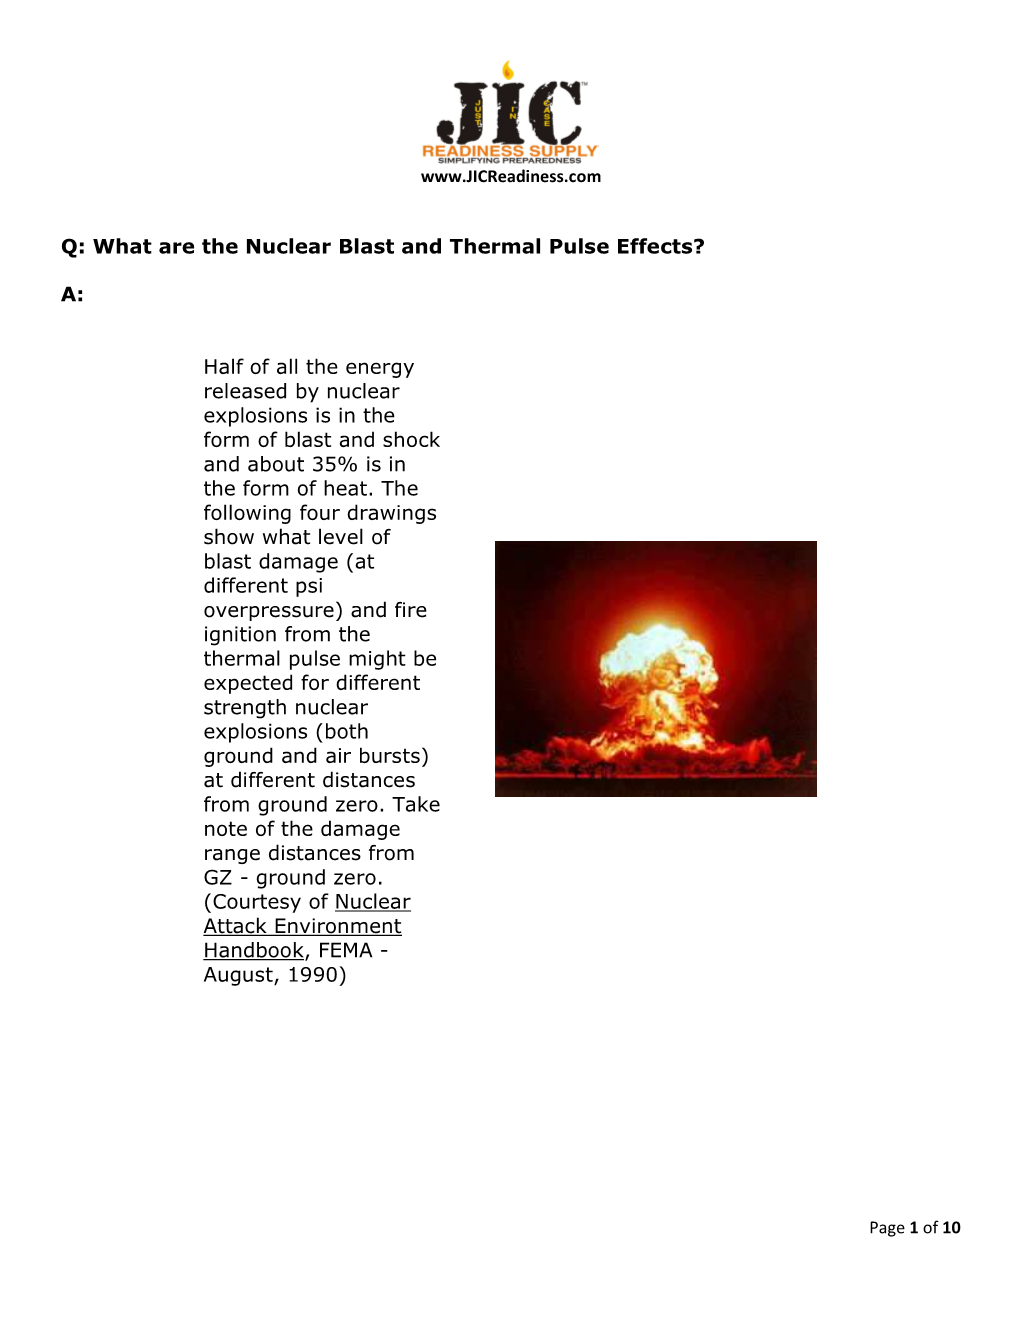 Q: What Are the Nuclear Blast and Thermal Pulse Effects?